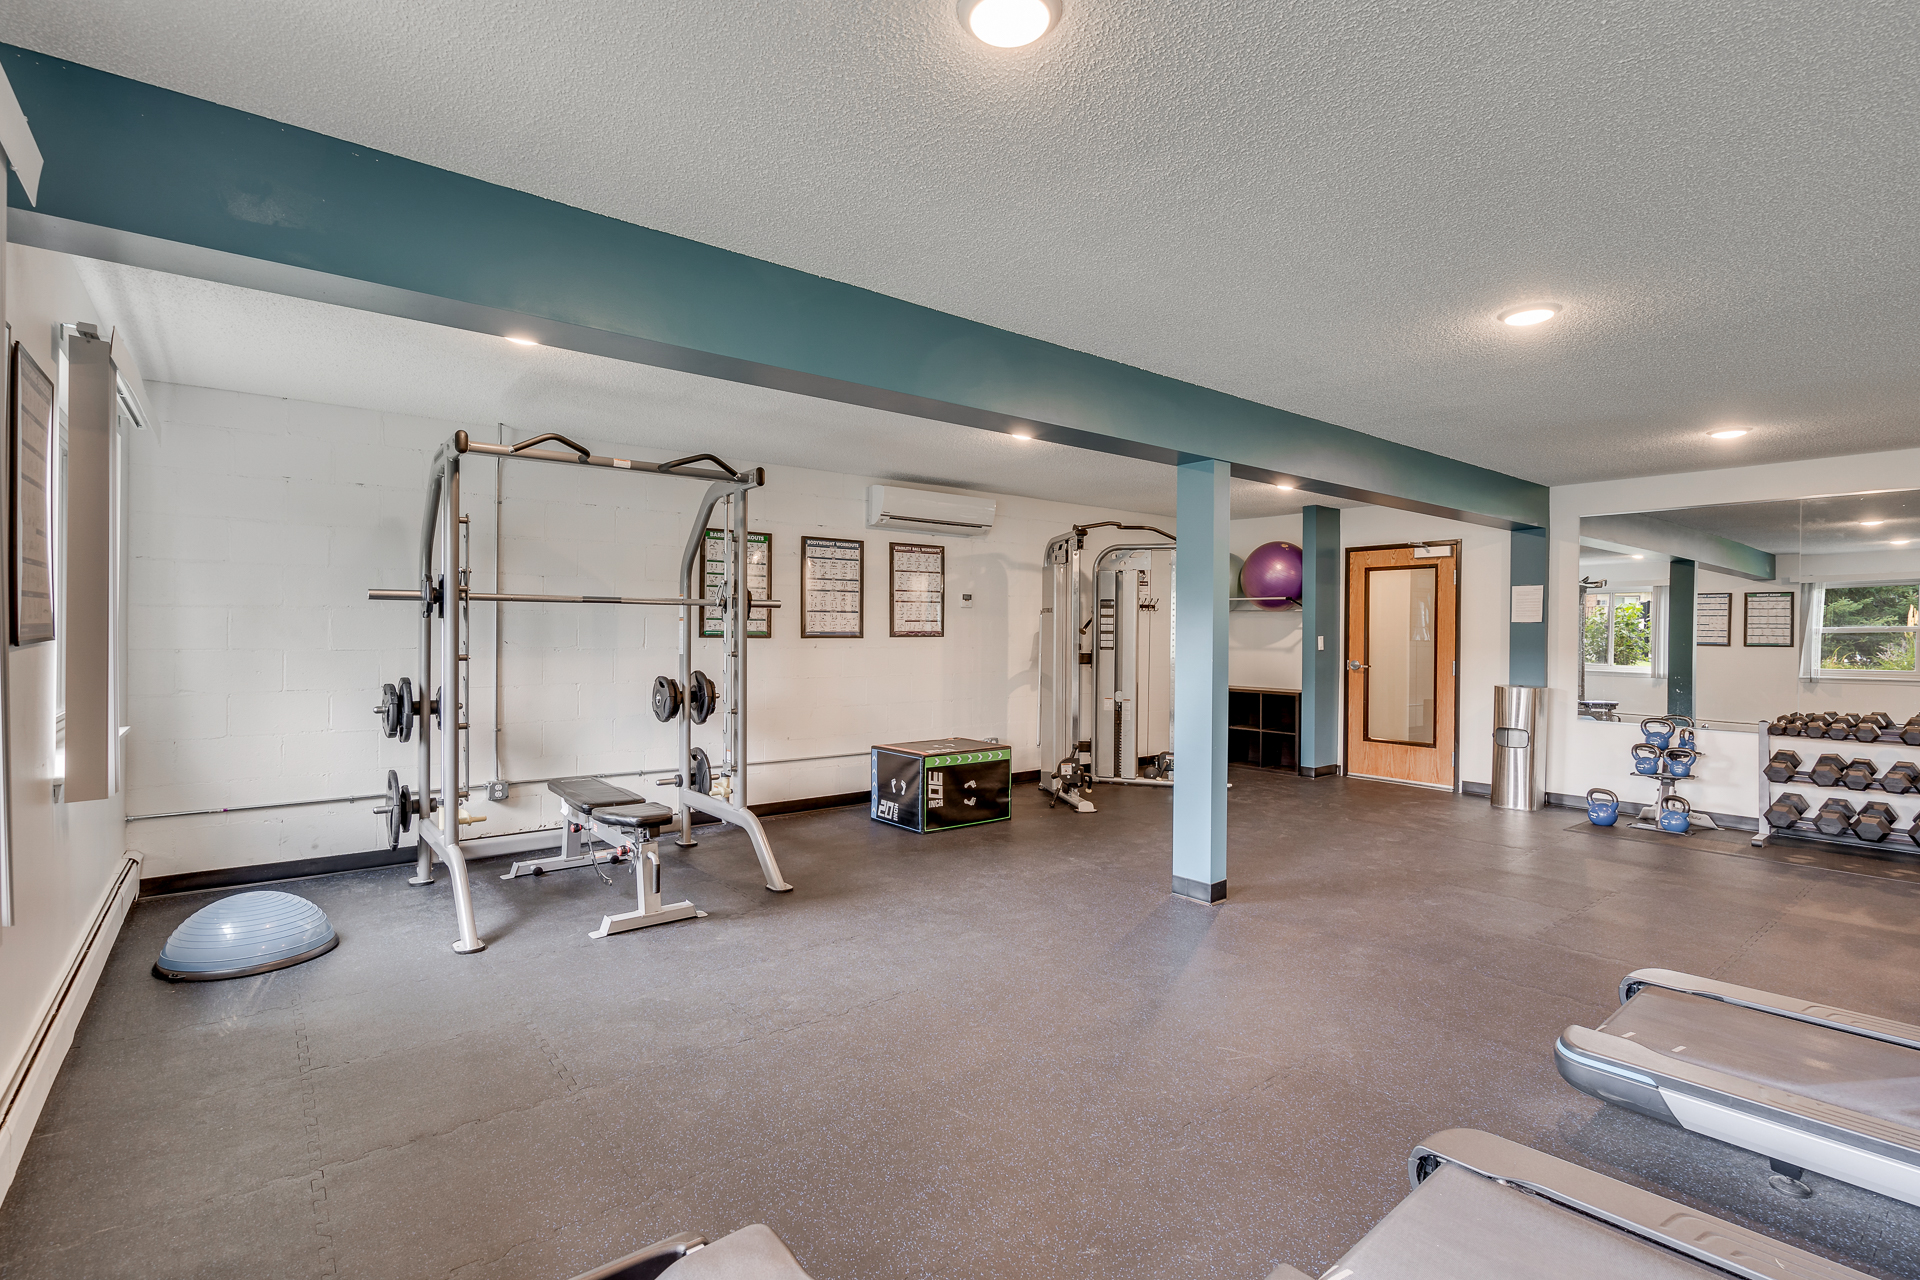 Free Weights In Fitness Center At Sumter Green Apartments In Crystal, MN